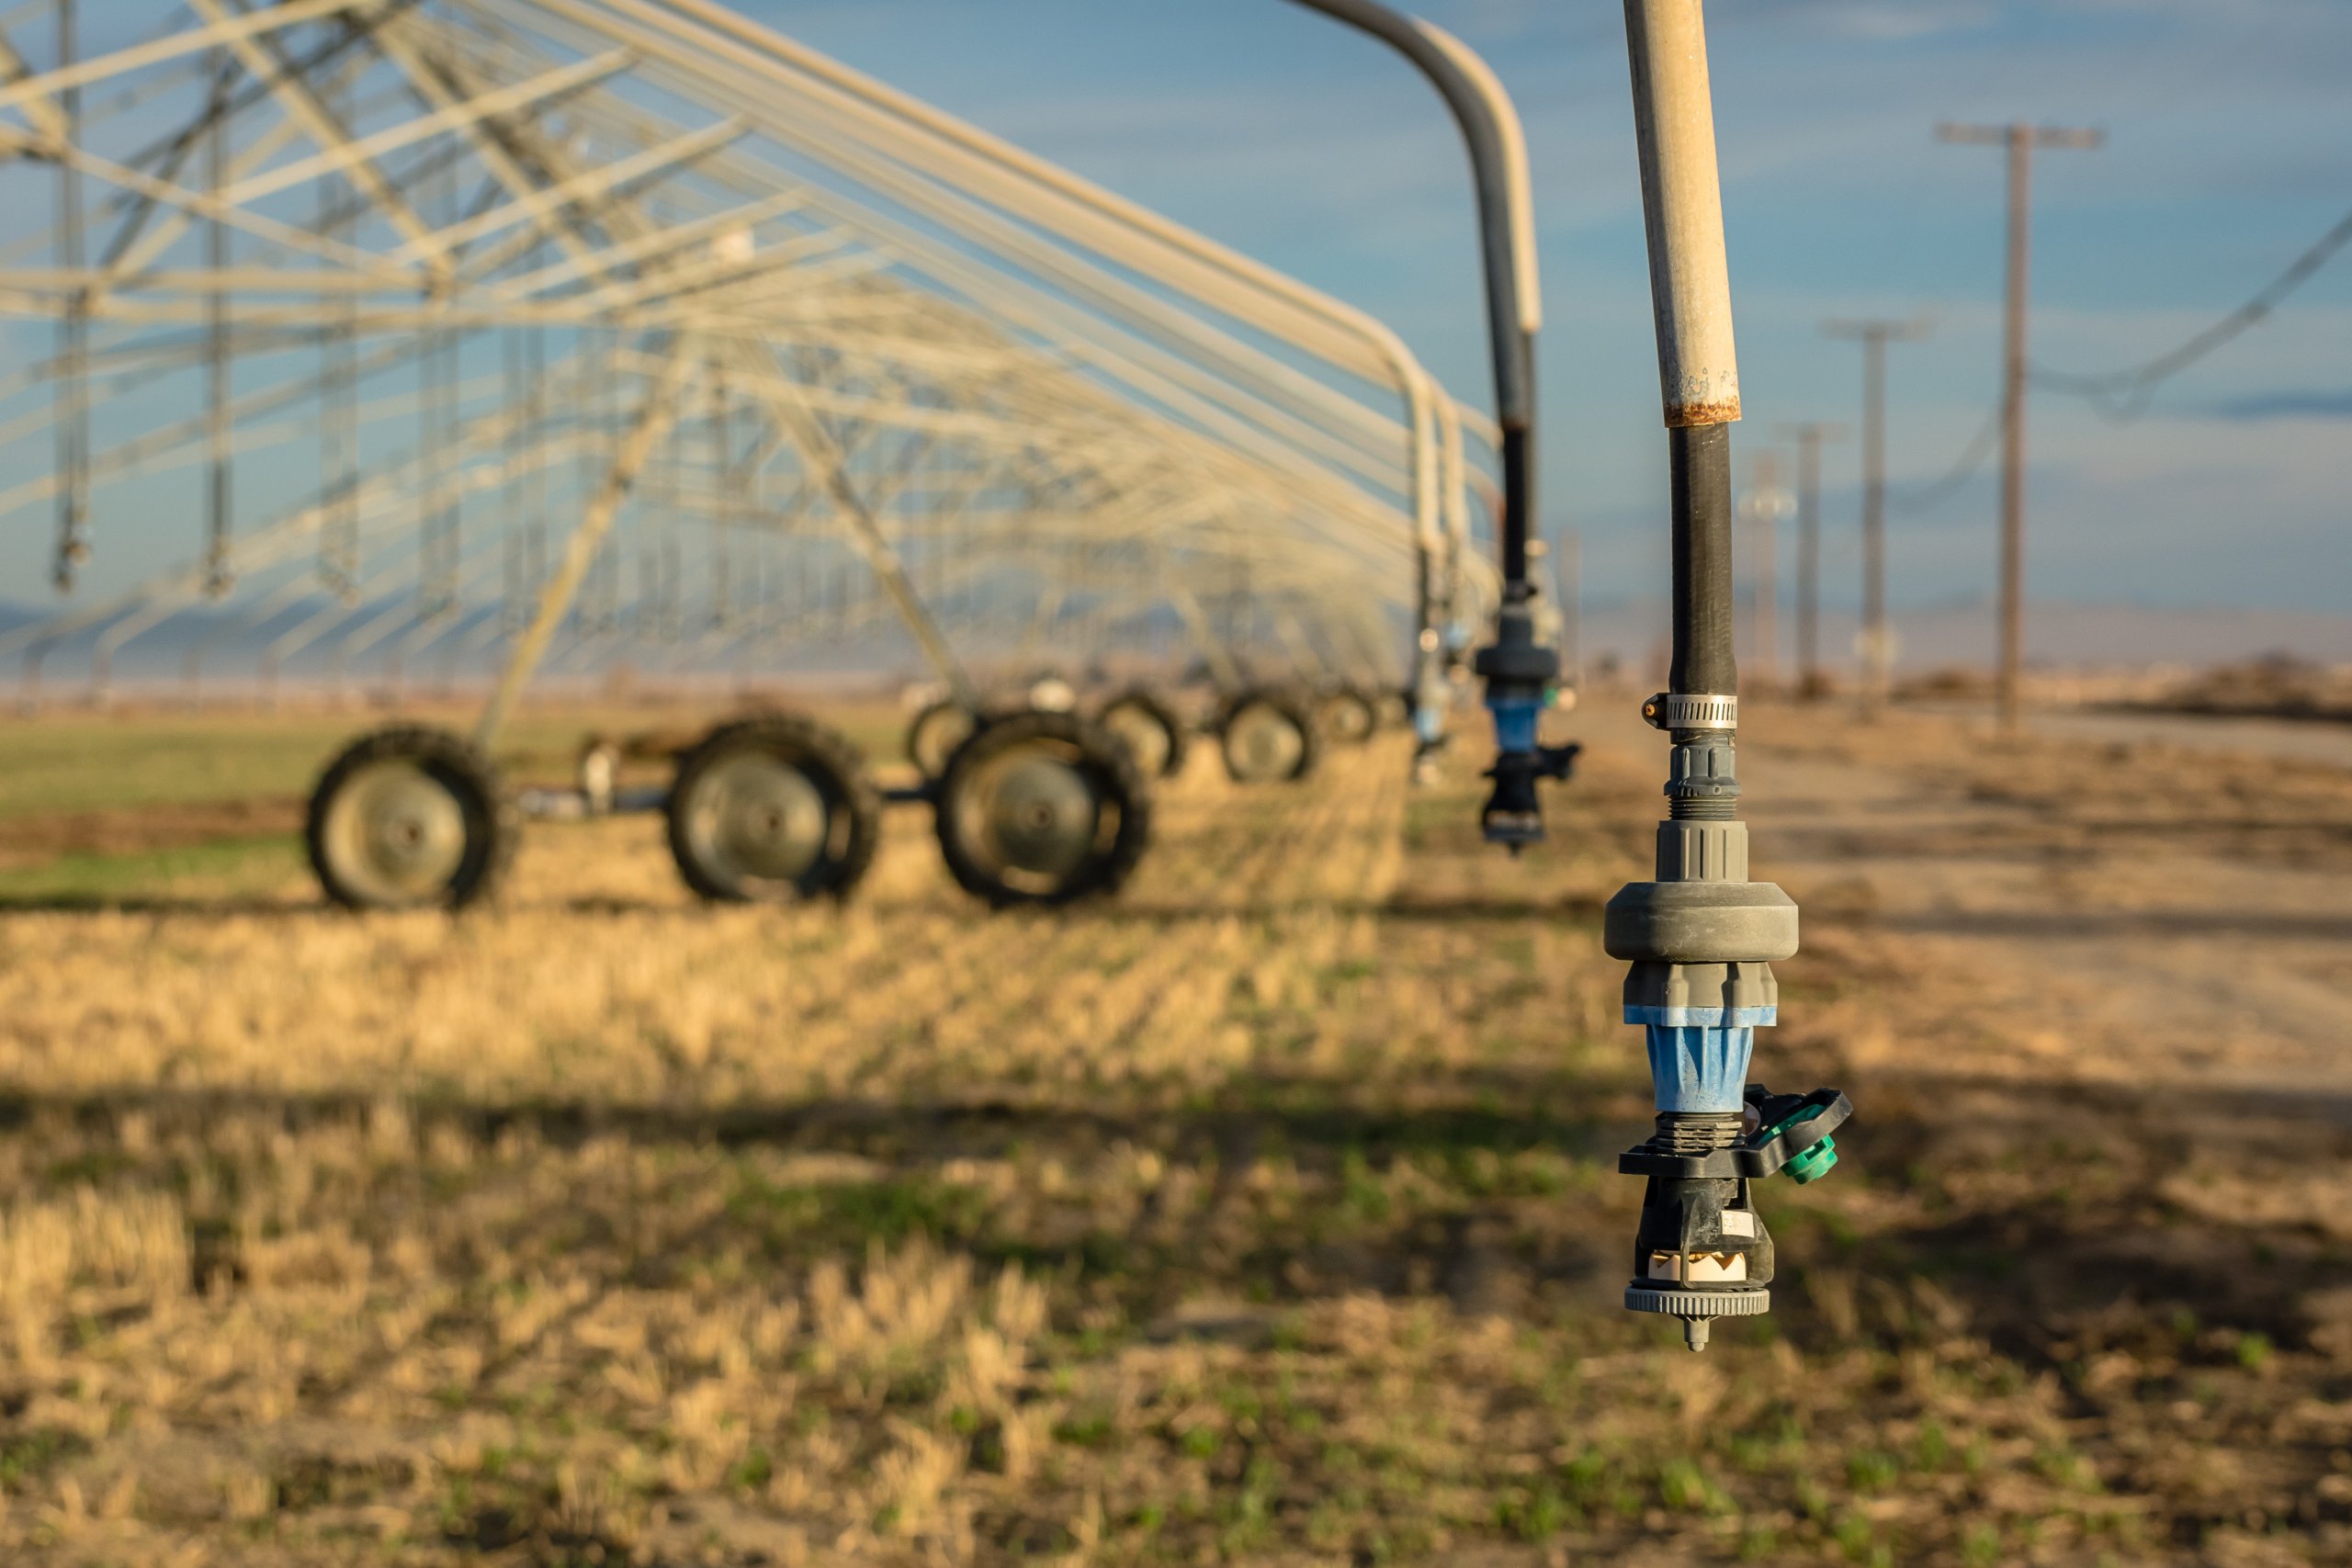 A center-pivot irrigation system in Southern California. According to NOAA (National Oceanic and Atmospheric Administration), as of mid-July, 2021, 89% of the U.S. West was in drought and 25% was in exceptional drought conditions.